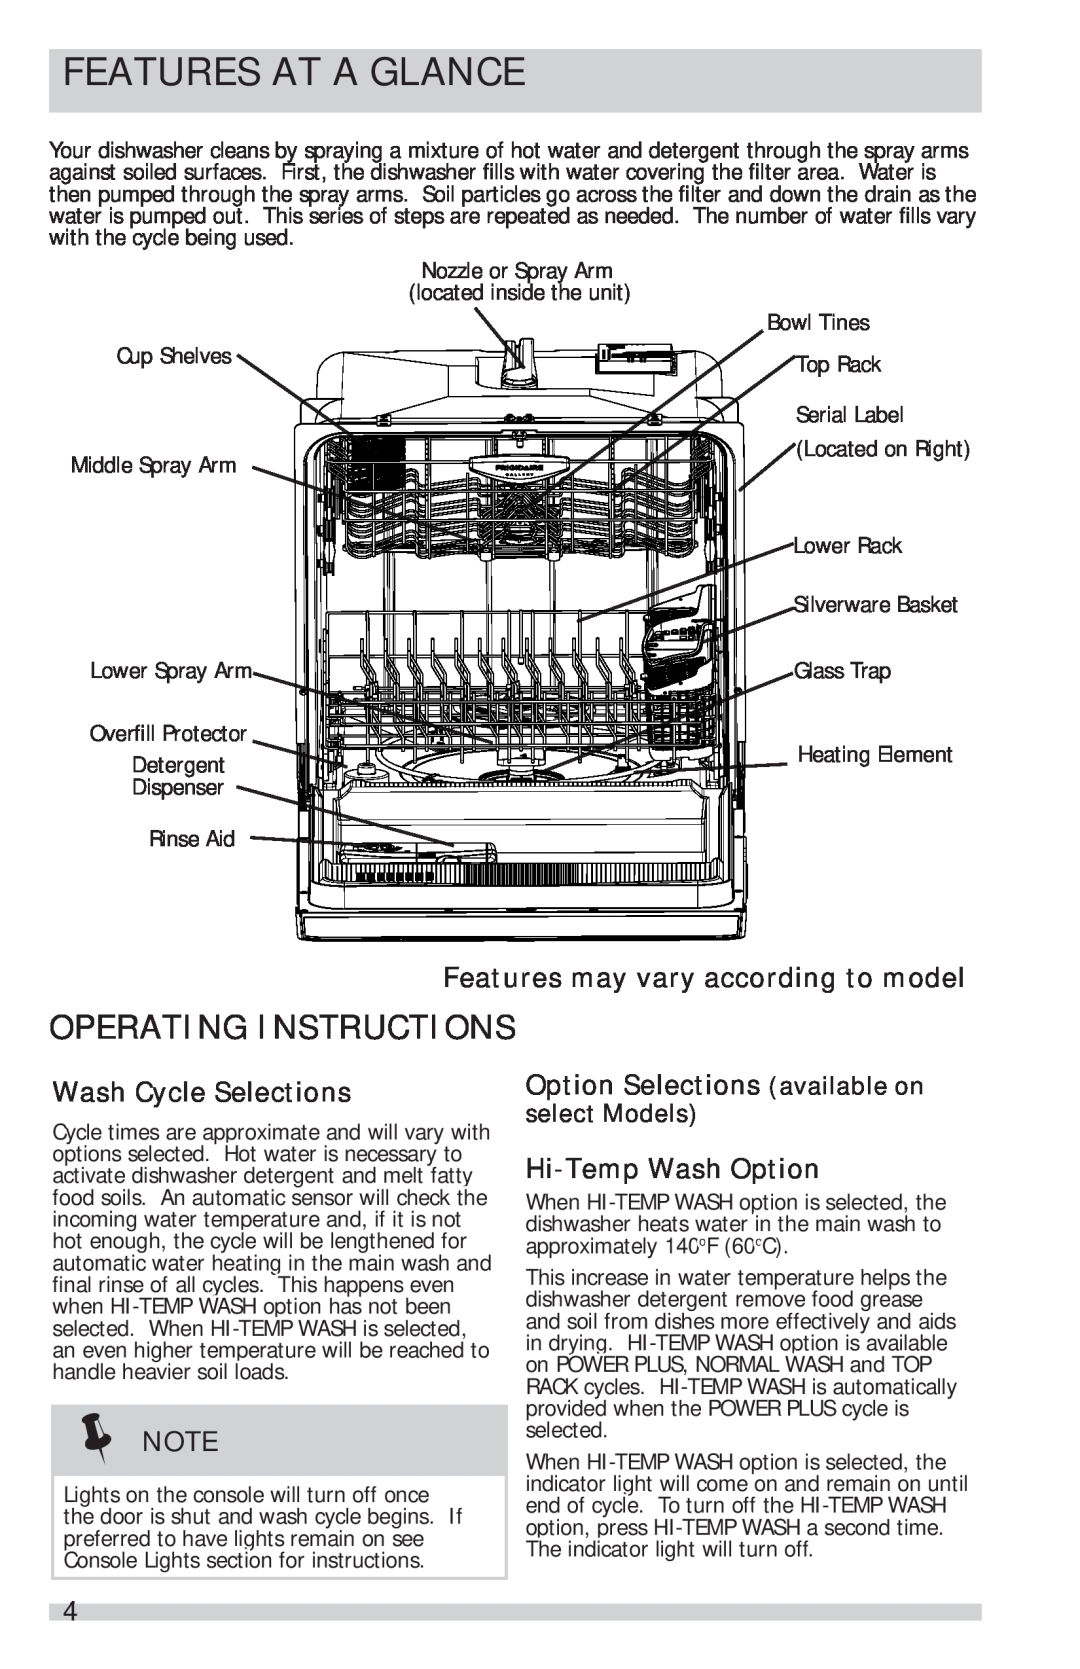 Frigidaire FGID2466QW, FGID2466QB manual Features At A Glance, Features may vary according to model, Wash Cycle Selections 